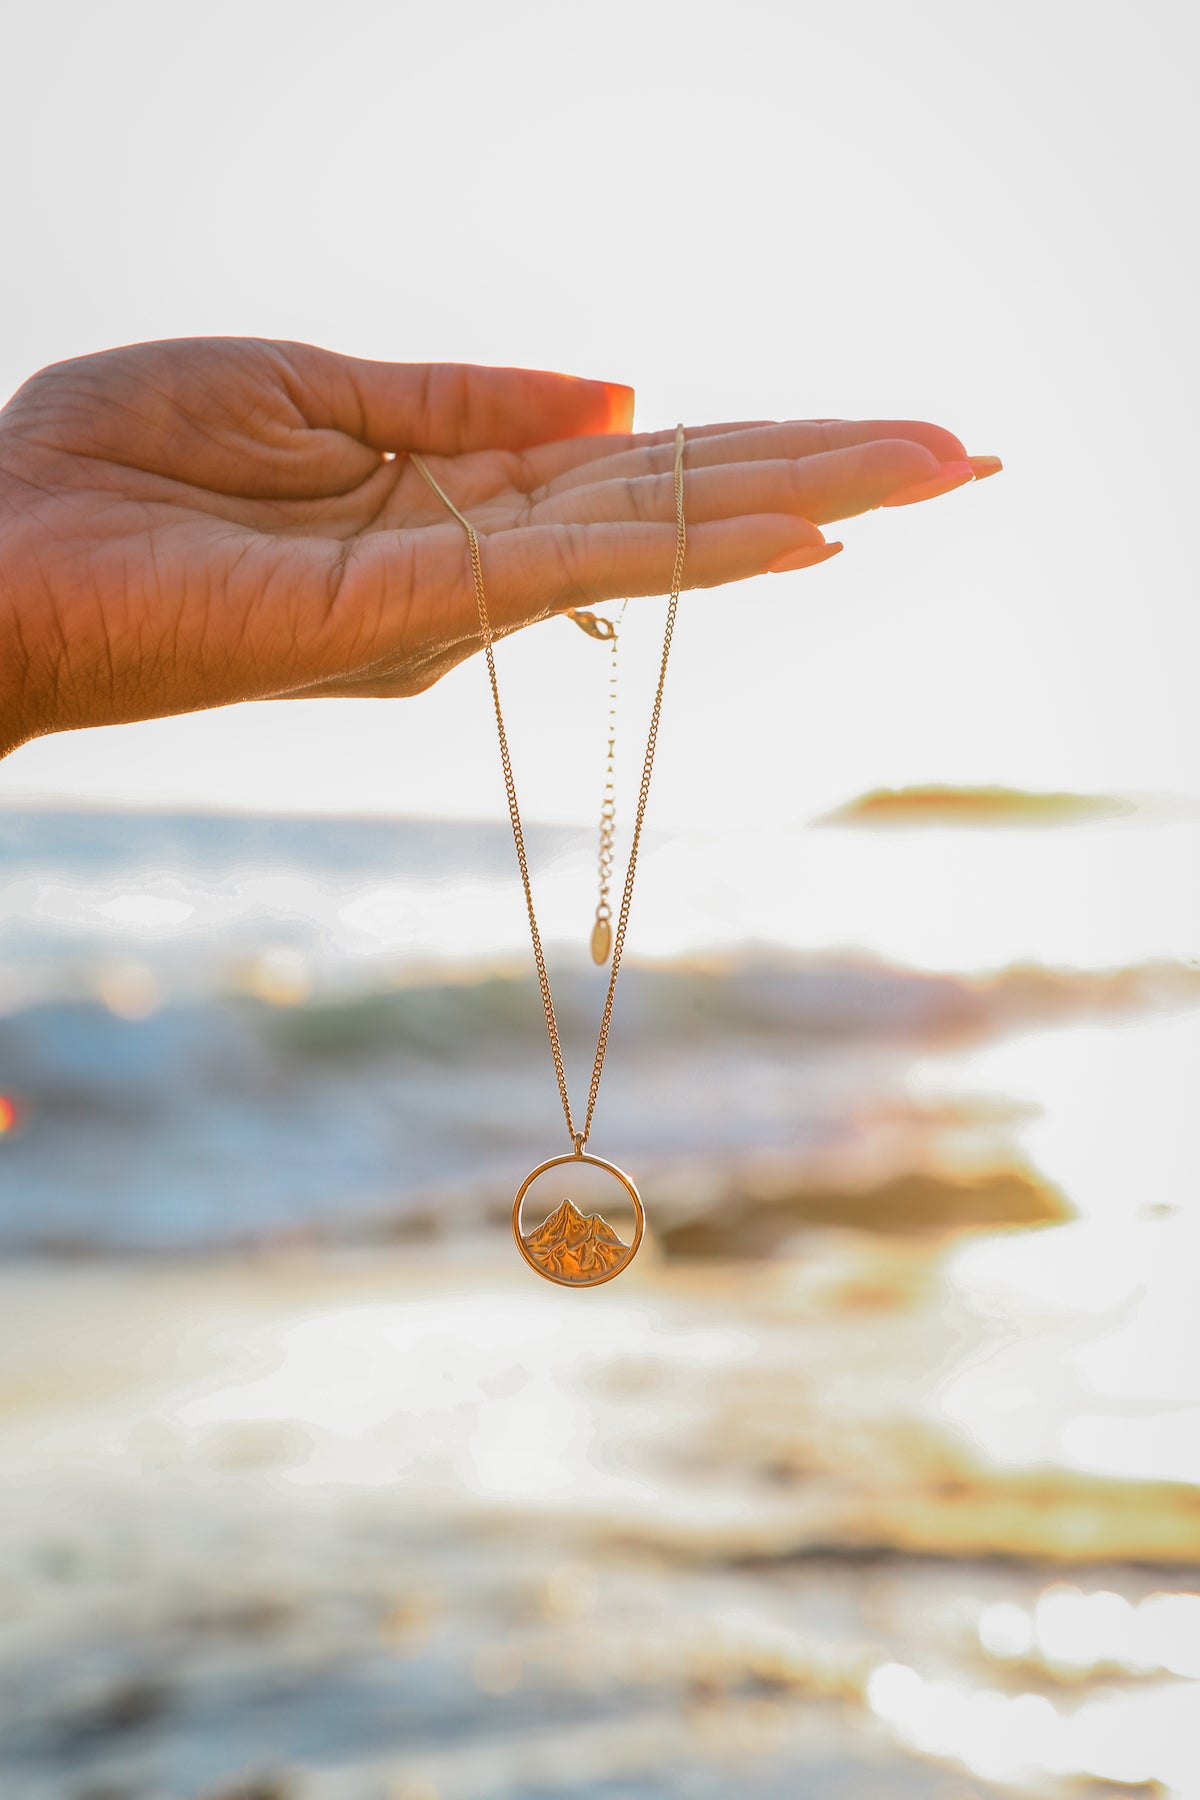 Breaking point necklace hanging from model hand with beach background